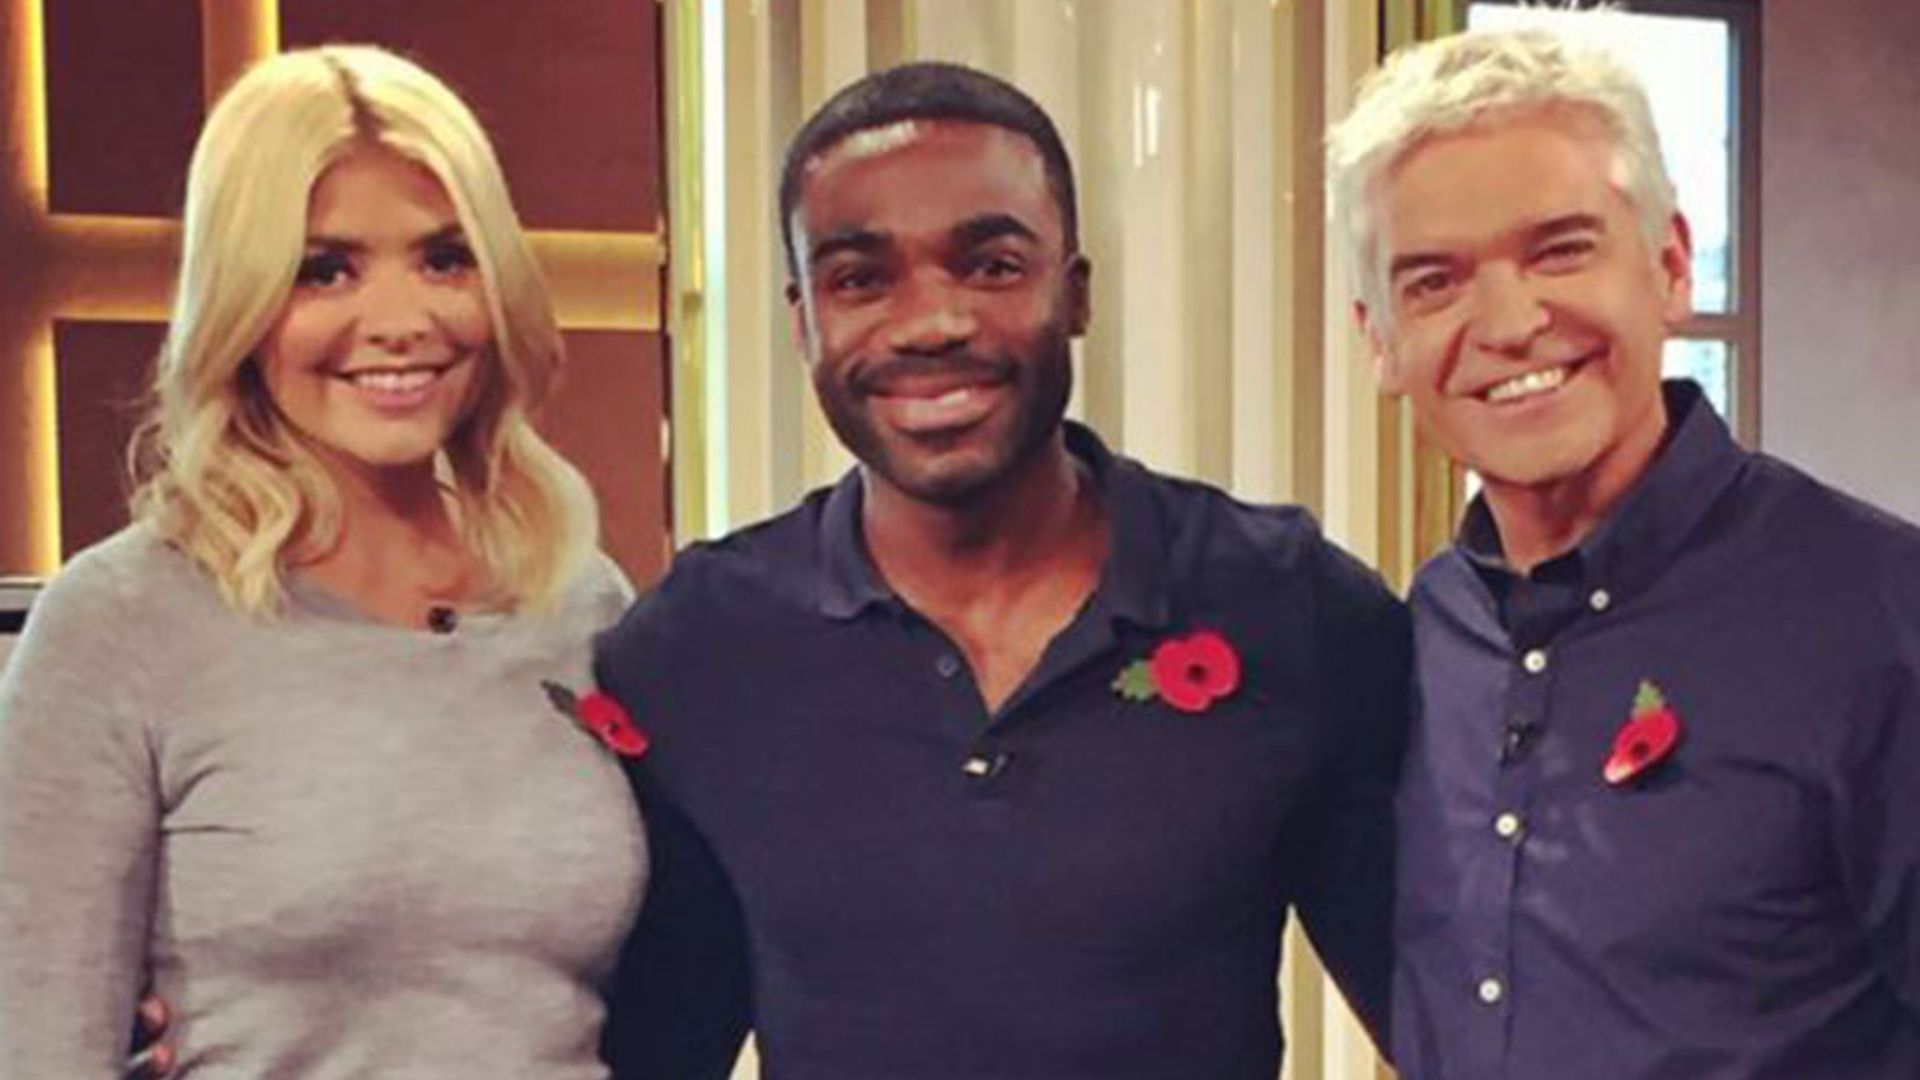 Strictly Come Dancing's Ore Oduba to join Holly Willoughby as guest co-host on This Morning